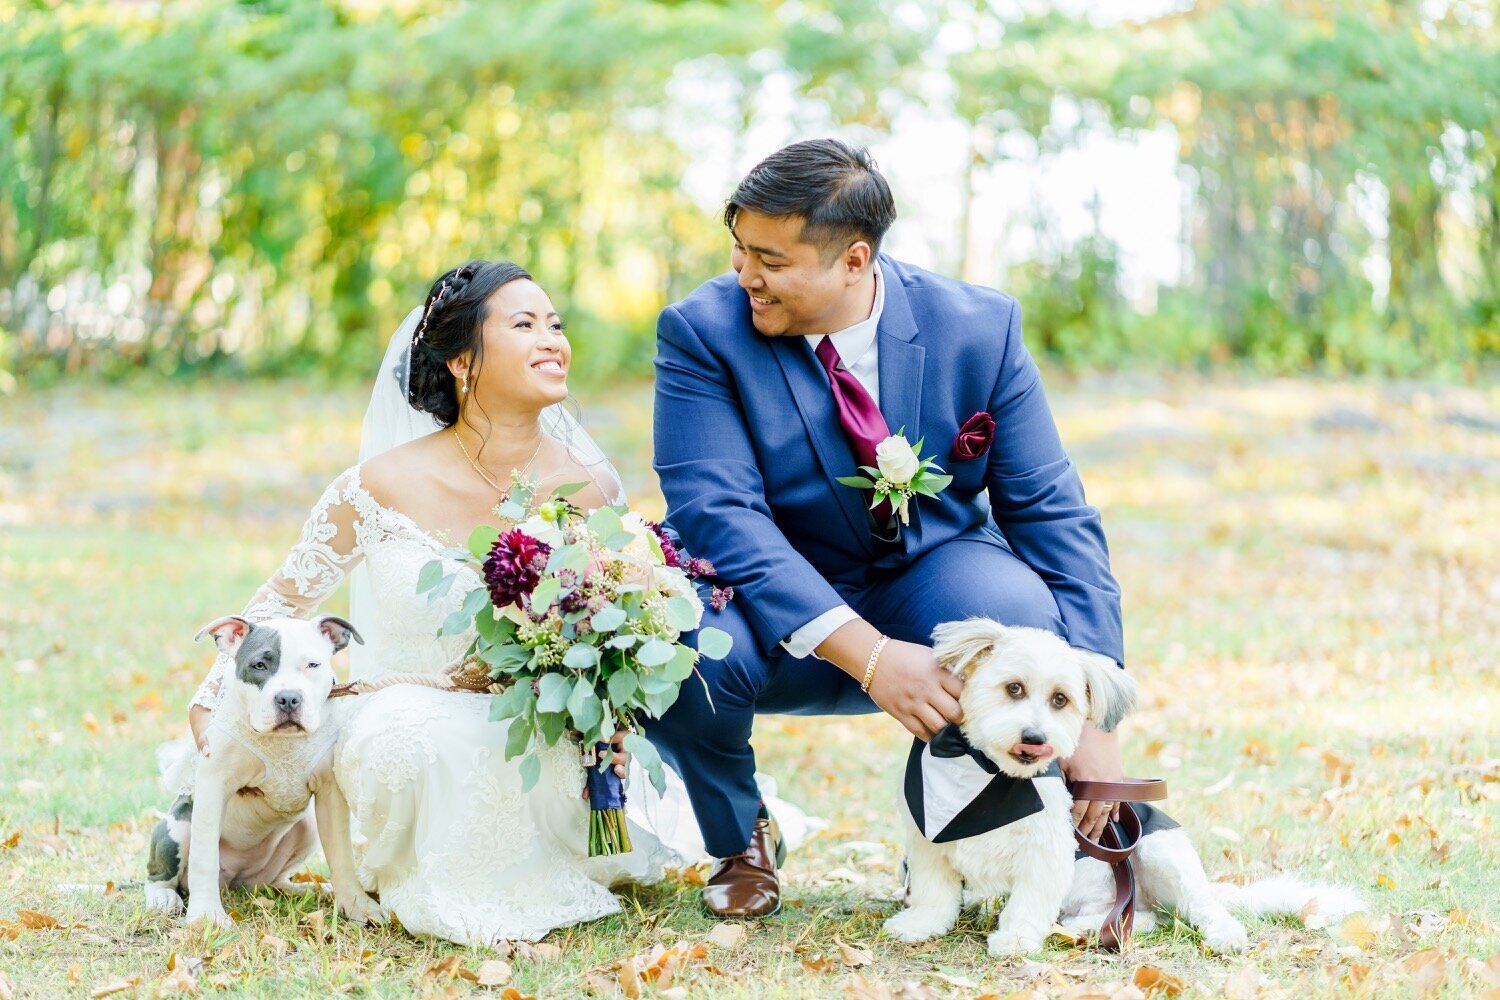 Bride and groom with colorful bouquet bending down and smiling with their dogs